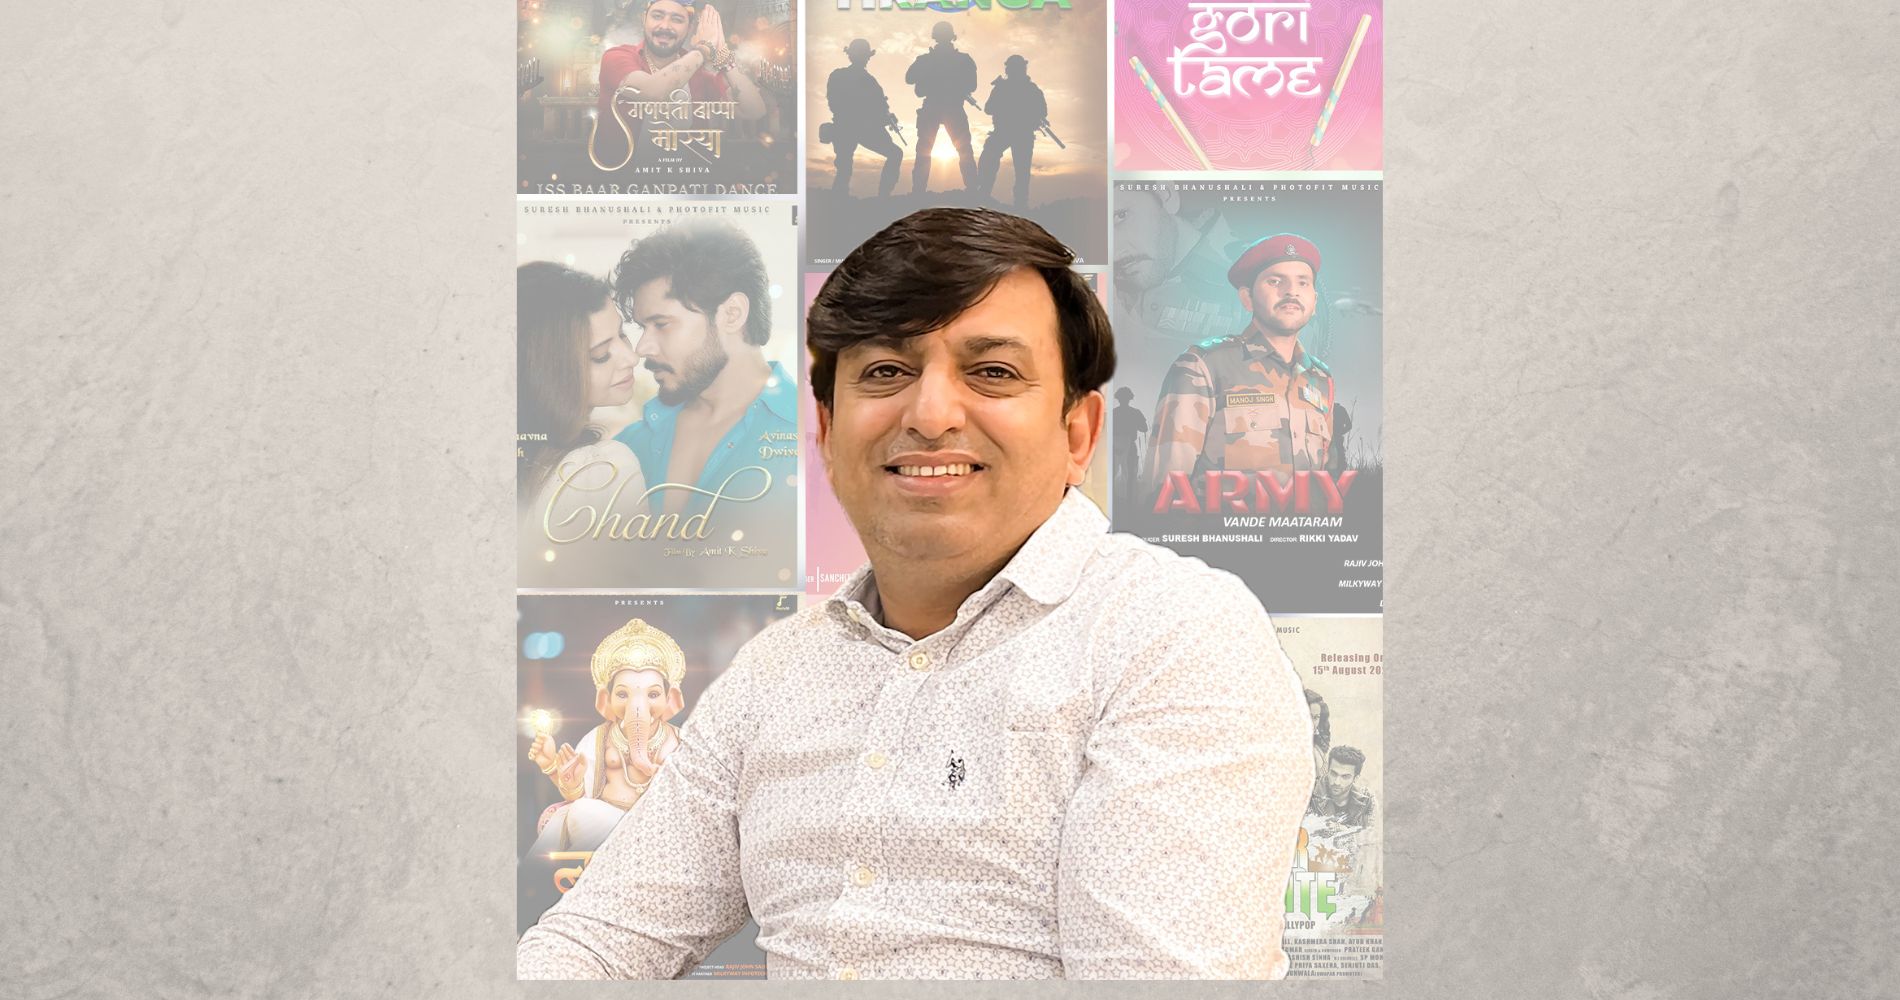 Indian Culture Justifies festivals with songs, Suresh Bhanushali, Photofit Music